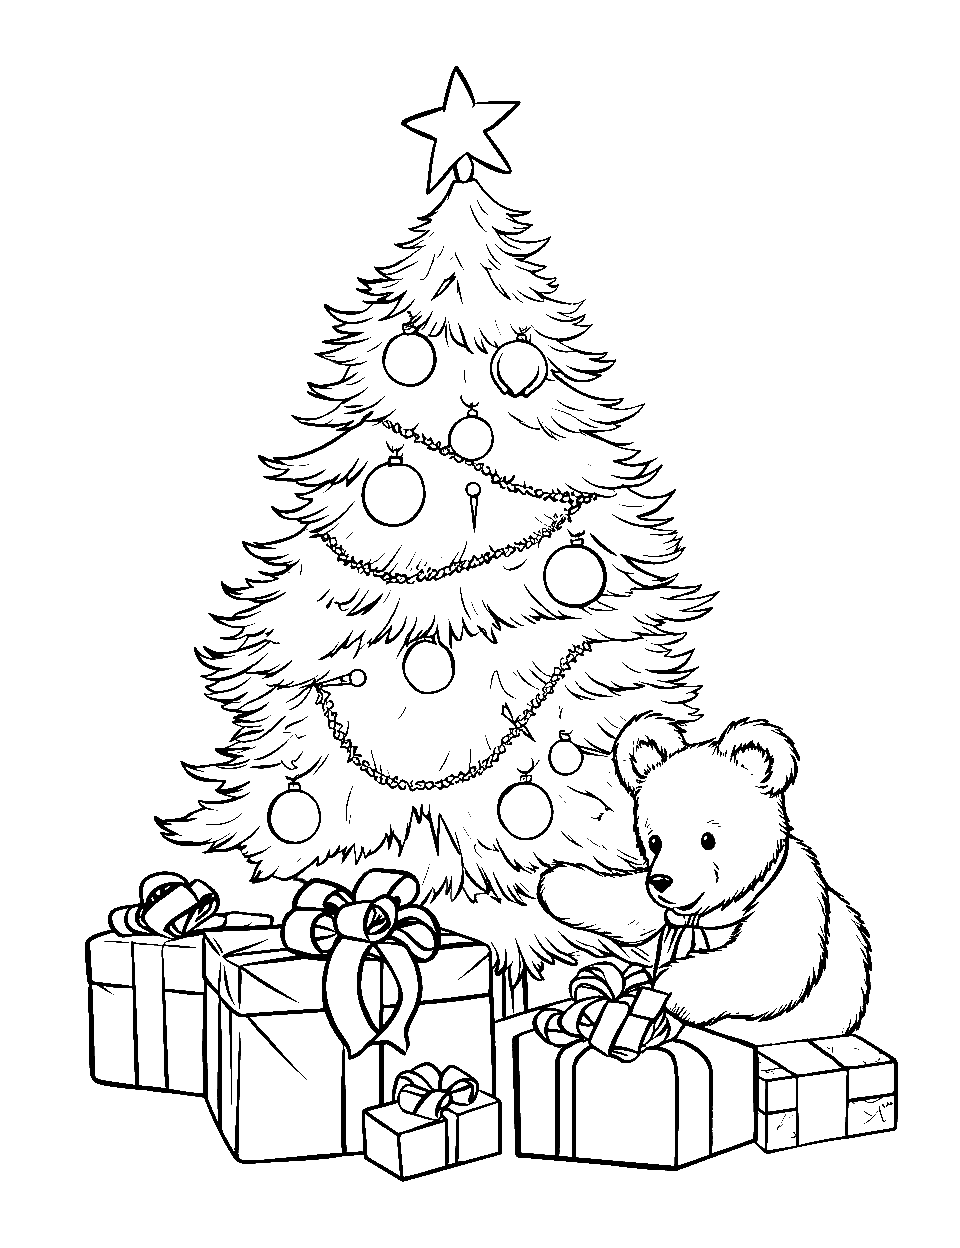 Friendly Bear Opening Presents Coloring Page - A friendly bear unwrapping presents under a shimmering Christmas tree.